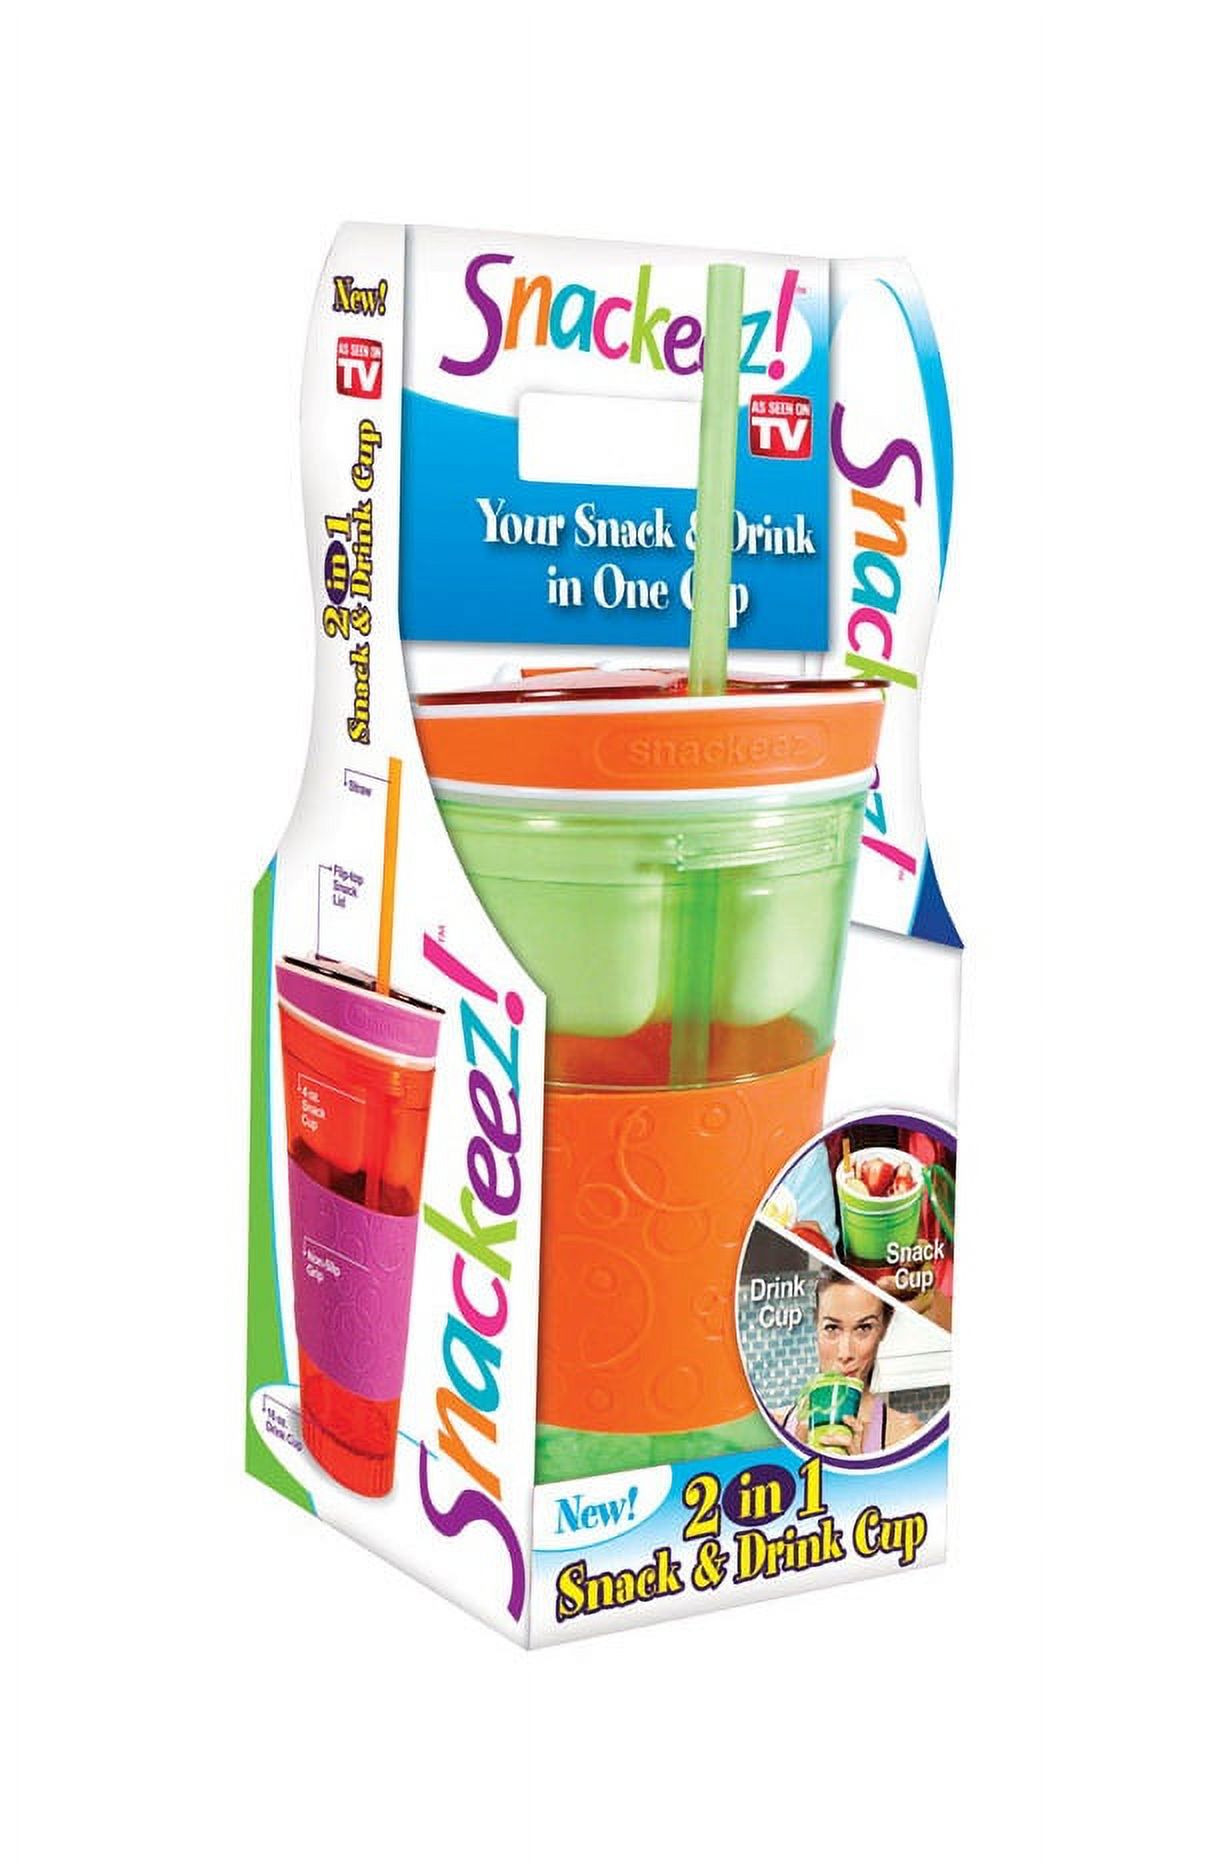 Snackeez Plastic 2 in 1 Snack & Drink Cup One Cup Assorted Colors - image 1 of 6